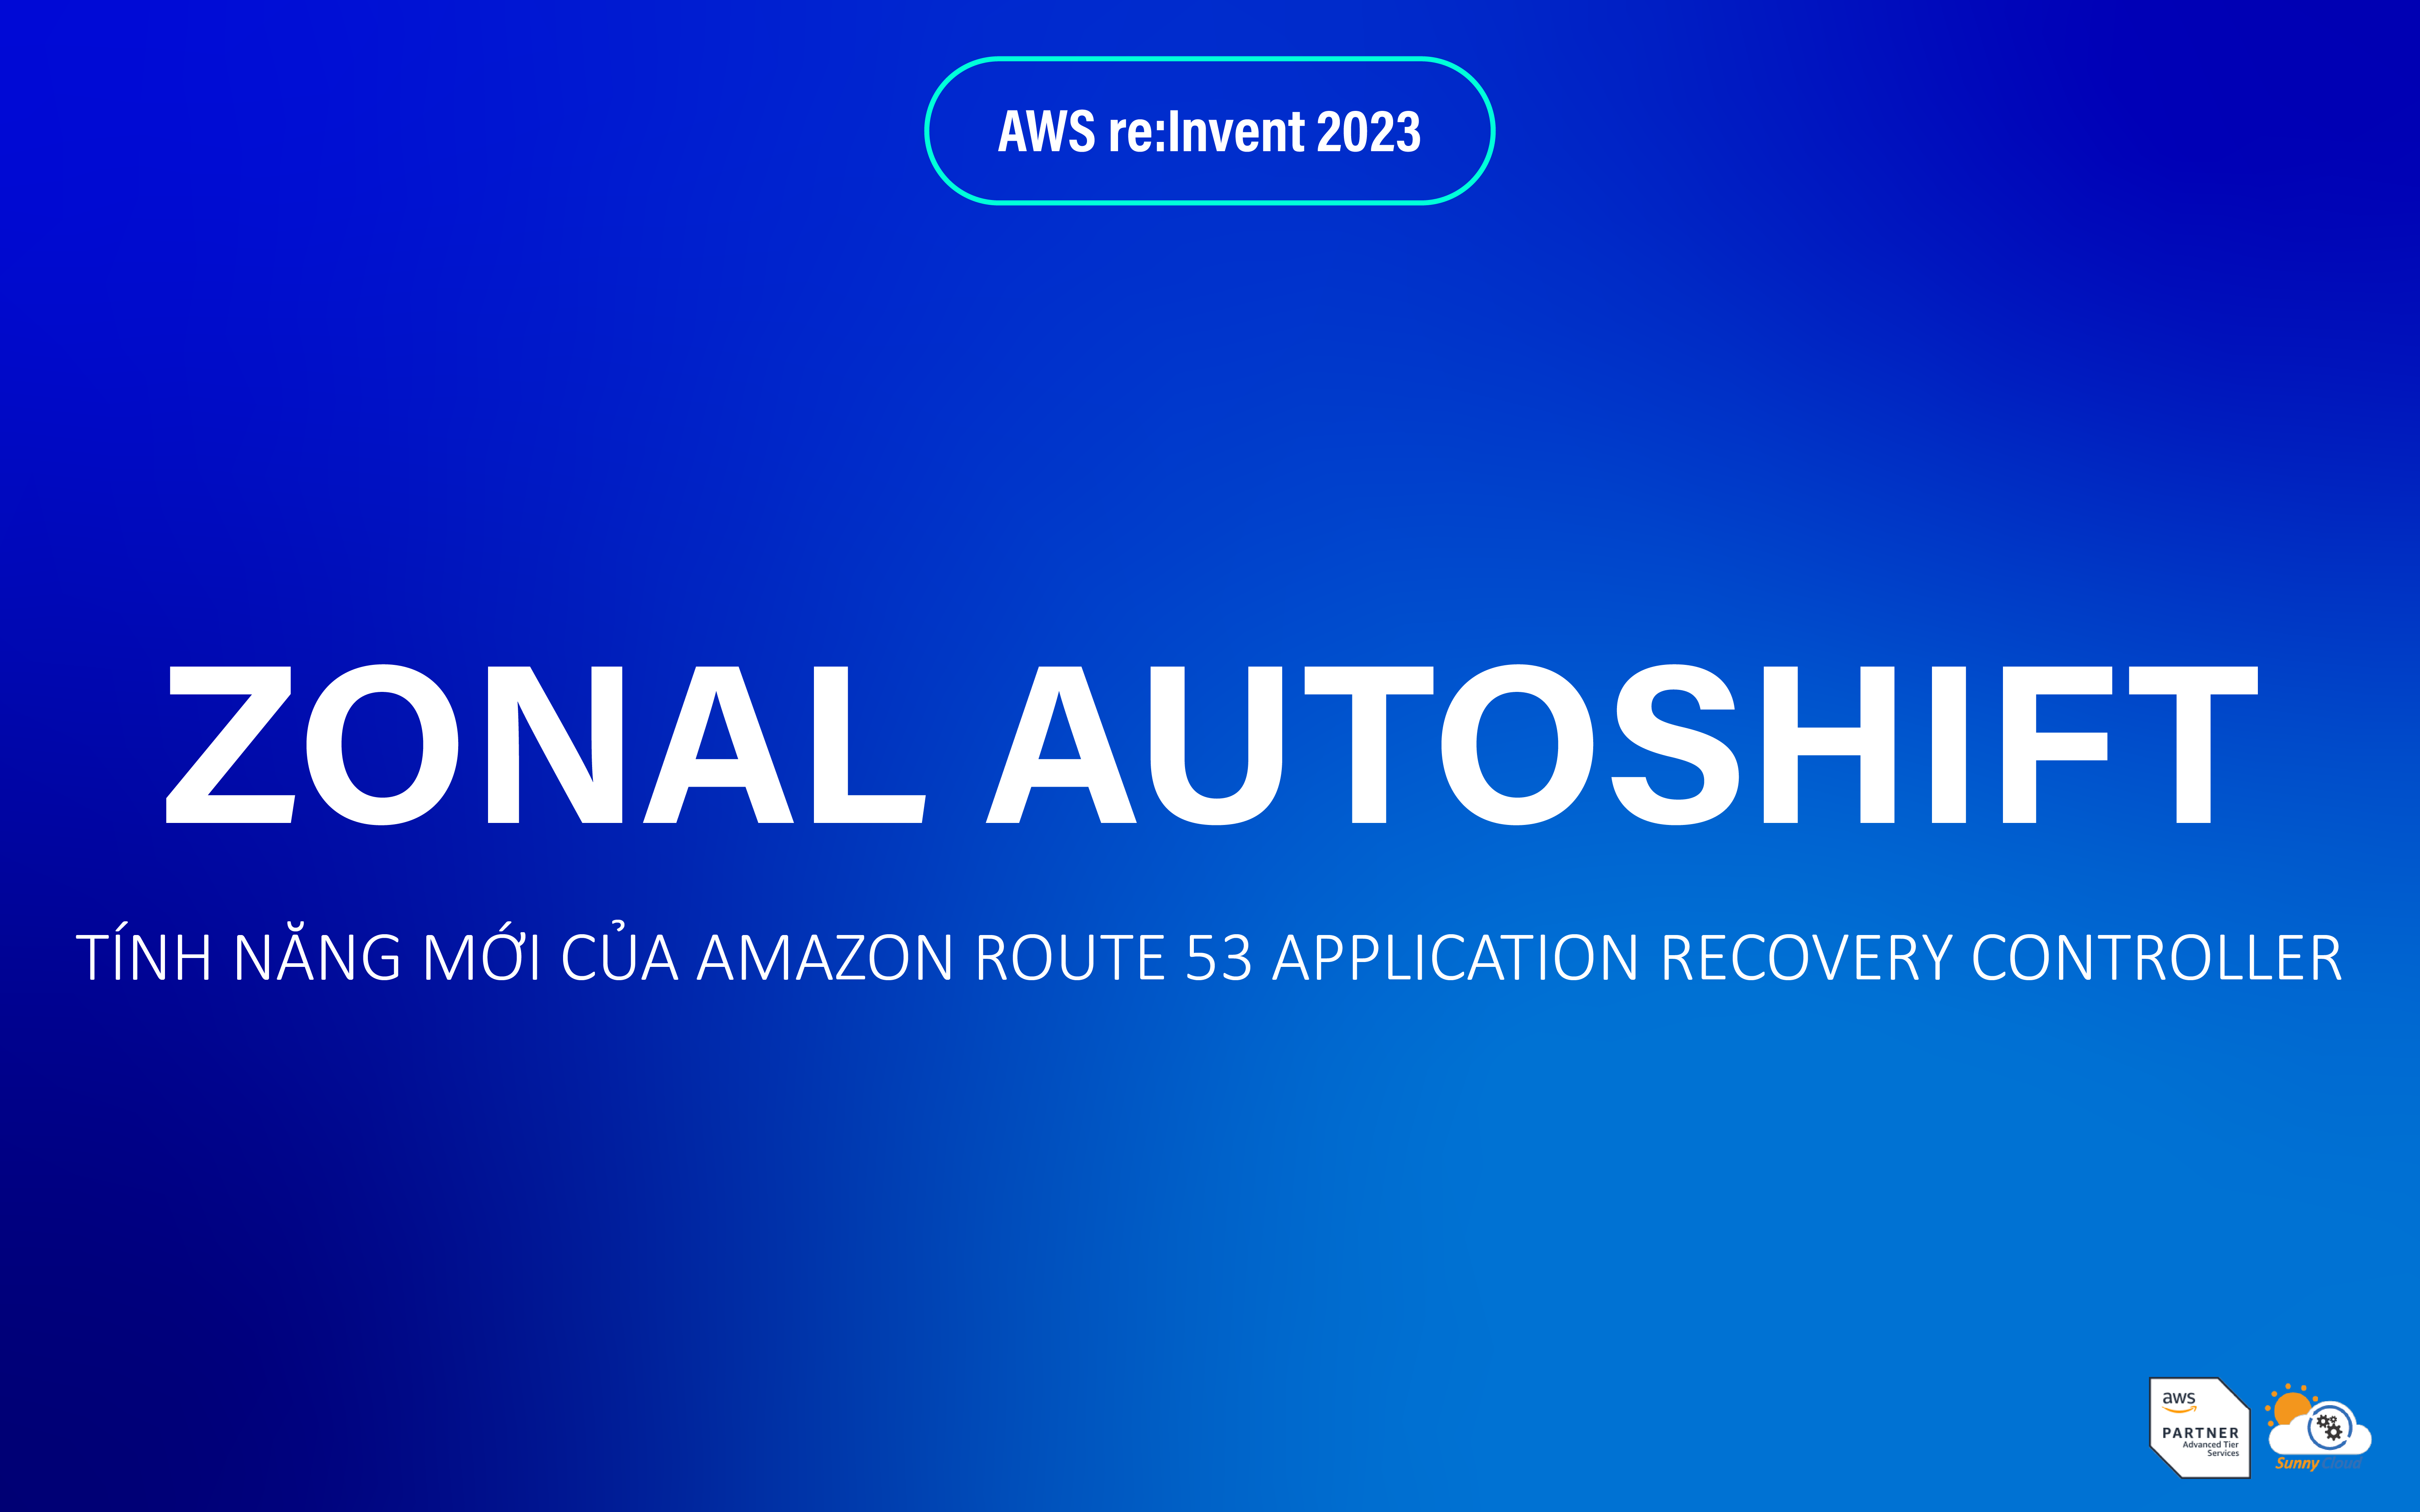 Zonal autoshift – Tính năng mới của Amazon Route 53 Application Recovery Controller